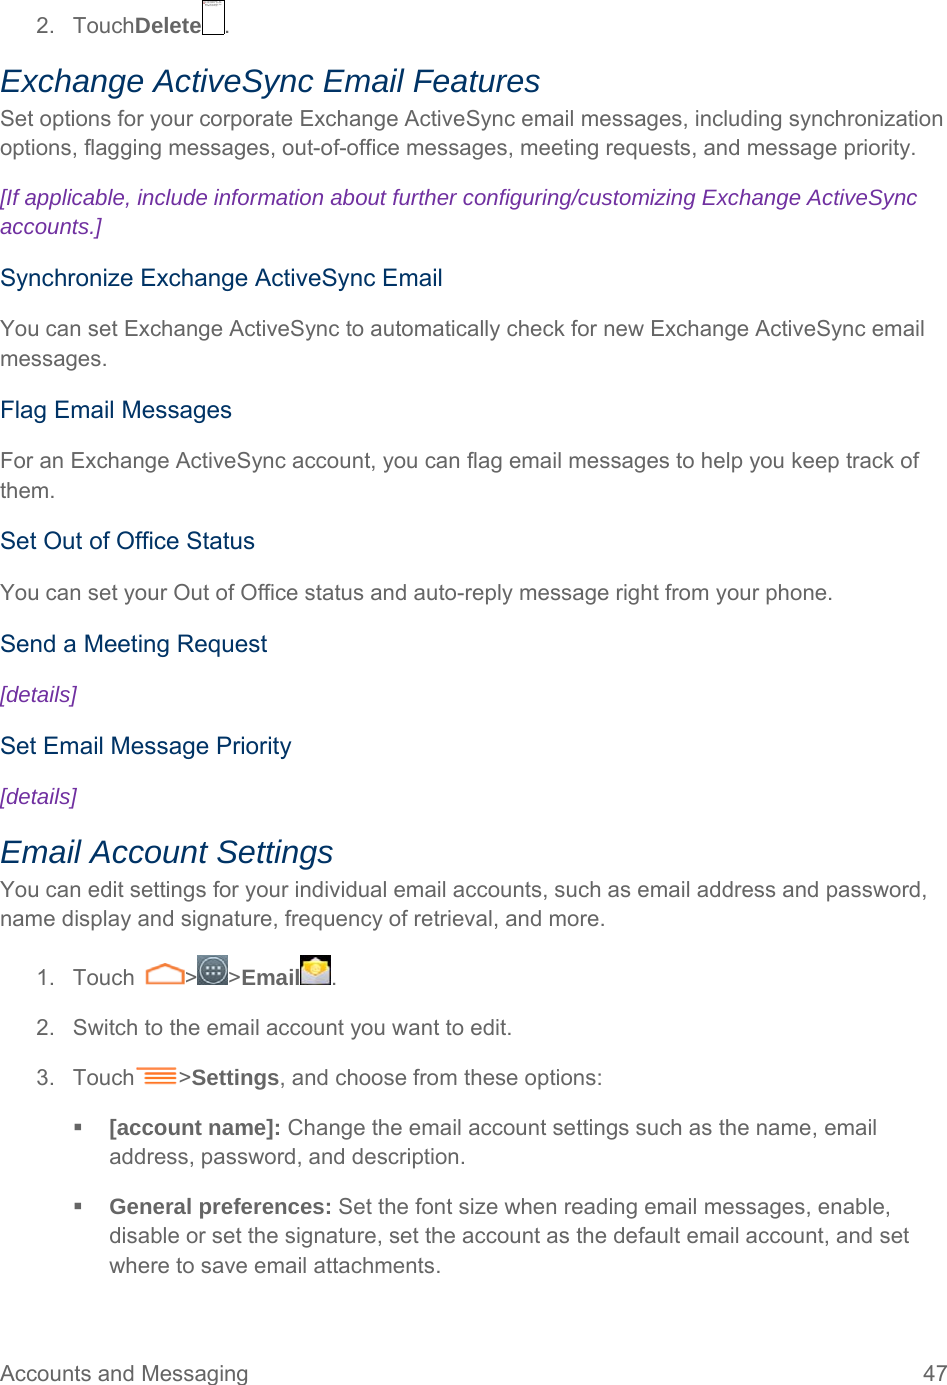 Accounts and Messaging  47 2. TouchDelete . Exchange ActiveSync Email Features Set options for your corporate Exchange ActiveSync email messages, including synchronization options, flagging messages, out-of-office messages, meeting requests, and message priority. [If applicable, include information about further configuring/customizing Exchange ActiveSync accounts.] Synchronize Exchange ActiveSync Email You can set Exchange ActiveSync to automatically check for new Exchange ActiveSync email messages. Flag Email Messages For an Exchange ActiveSync account, you can flag email messages to help you keep track of them. Set Out of Office Status You can set your Out of Office status and auto-reply message right from your phone. Send a Meeting Request [details] Set Email Message Priority [details] Email Account Settings You can edit settings for your individual email accounts, such as email address and password, name display and signature, frequency of retrieval, and more. 1. Touch  &gt; &gt;Email . 2.  Switch to the email account you want to edit. 3. Touch &gt;Settings, and choose from these options:   [account name]: Change the email account settings such as the name, email address, password, and description.  General preferences: Set the font size when reading email messages, enable, disable or set the signature, set the account as the default email account, and set where to save email attachments.  无法显示链接的图像。该文件可能已被移动、重命名或删除。请验证该链接是否指向正确的文件和位置。